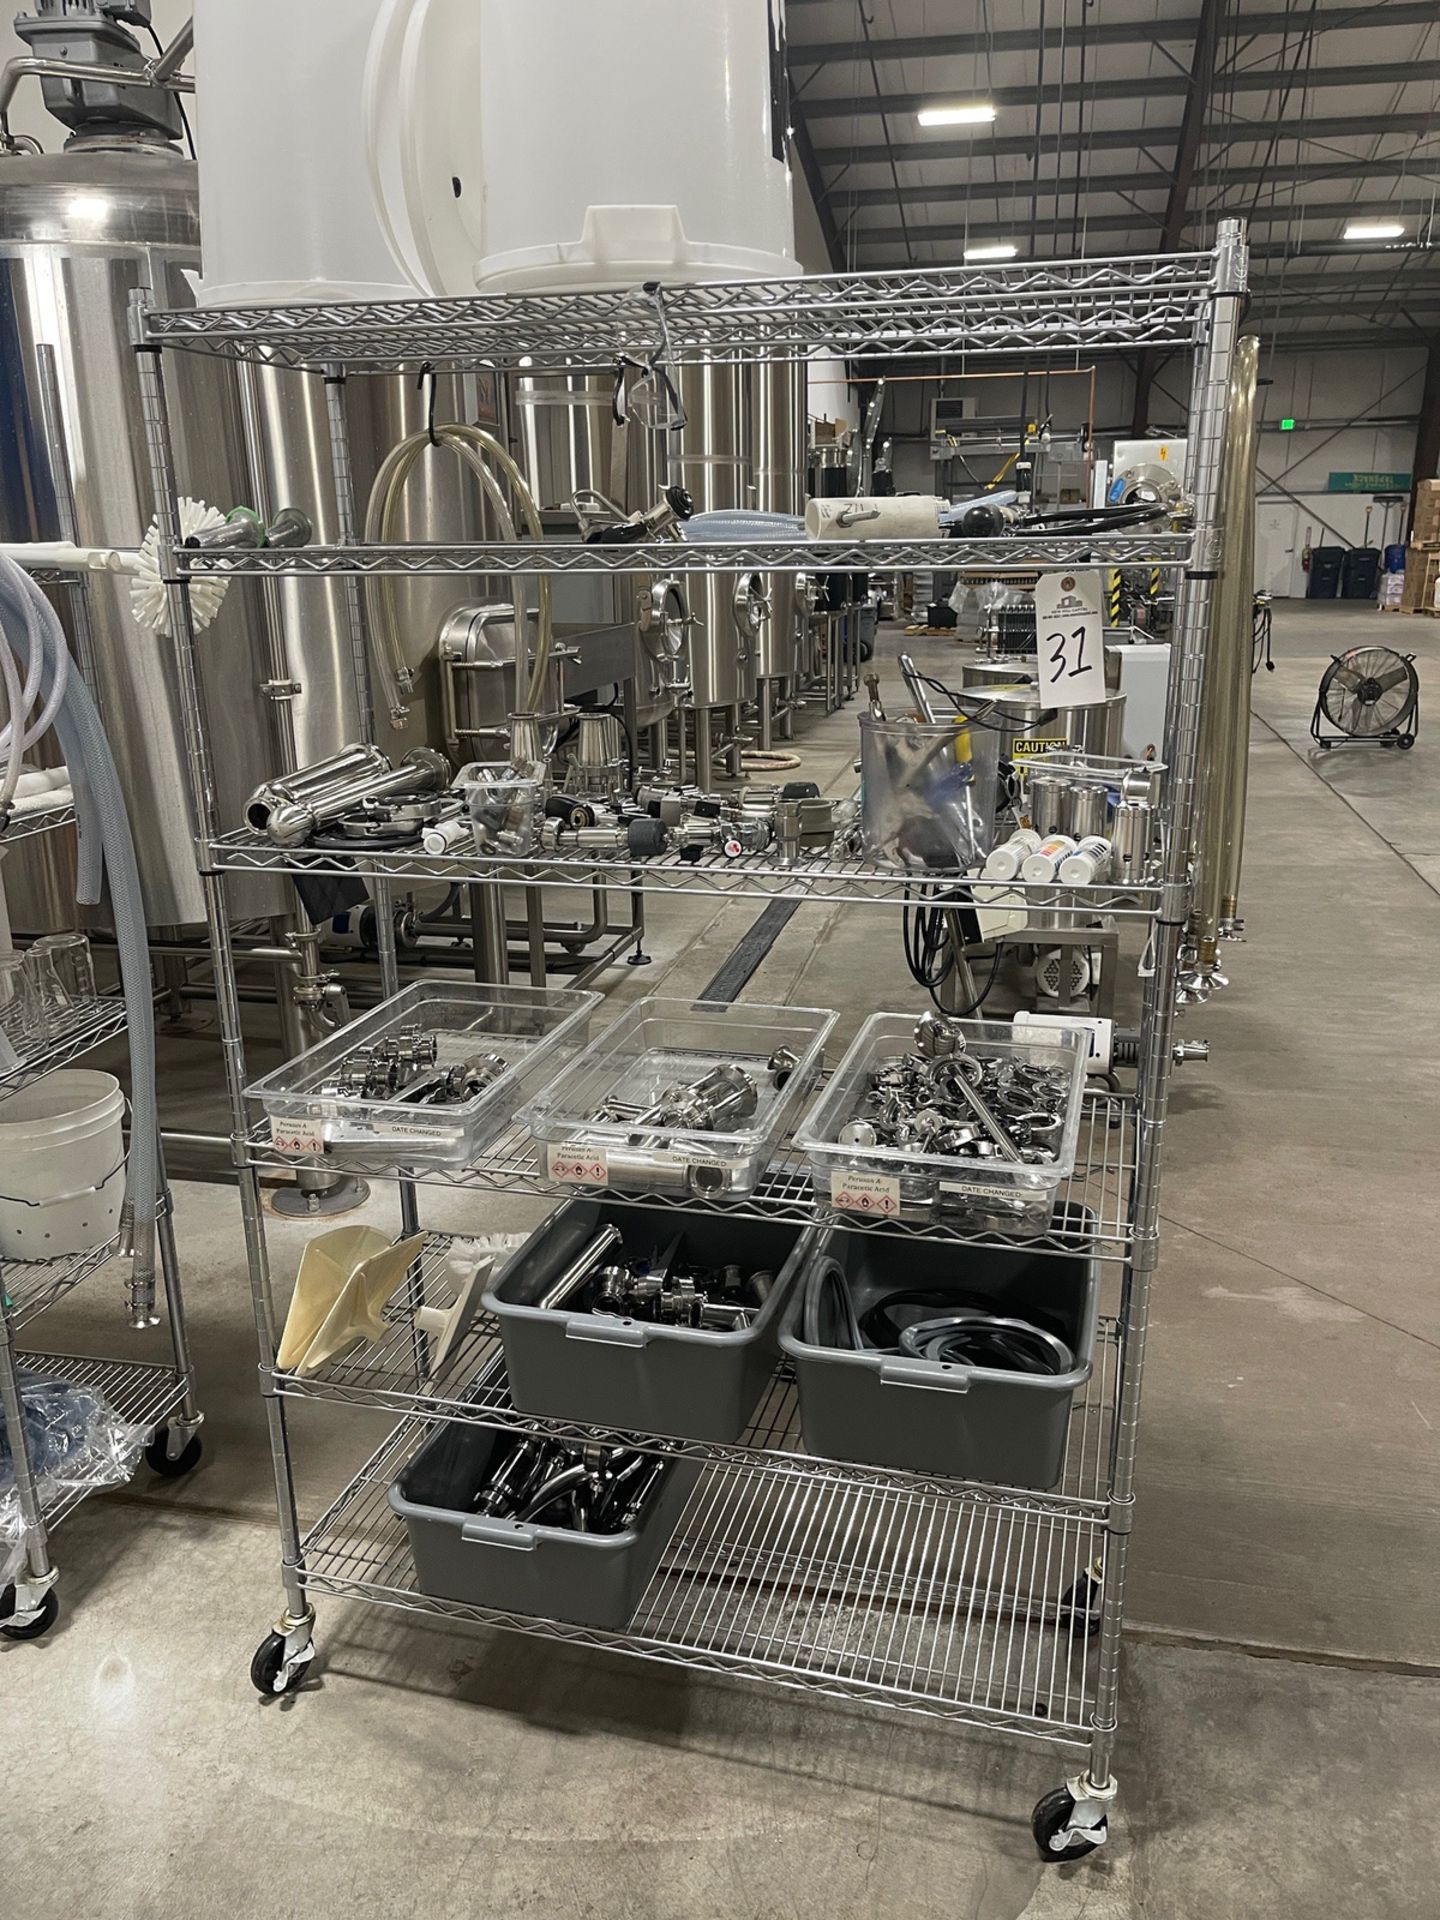 Contents of Rack (Rack Not Included), Stainless Steel Brewing Parts Including | Rig Fee $100